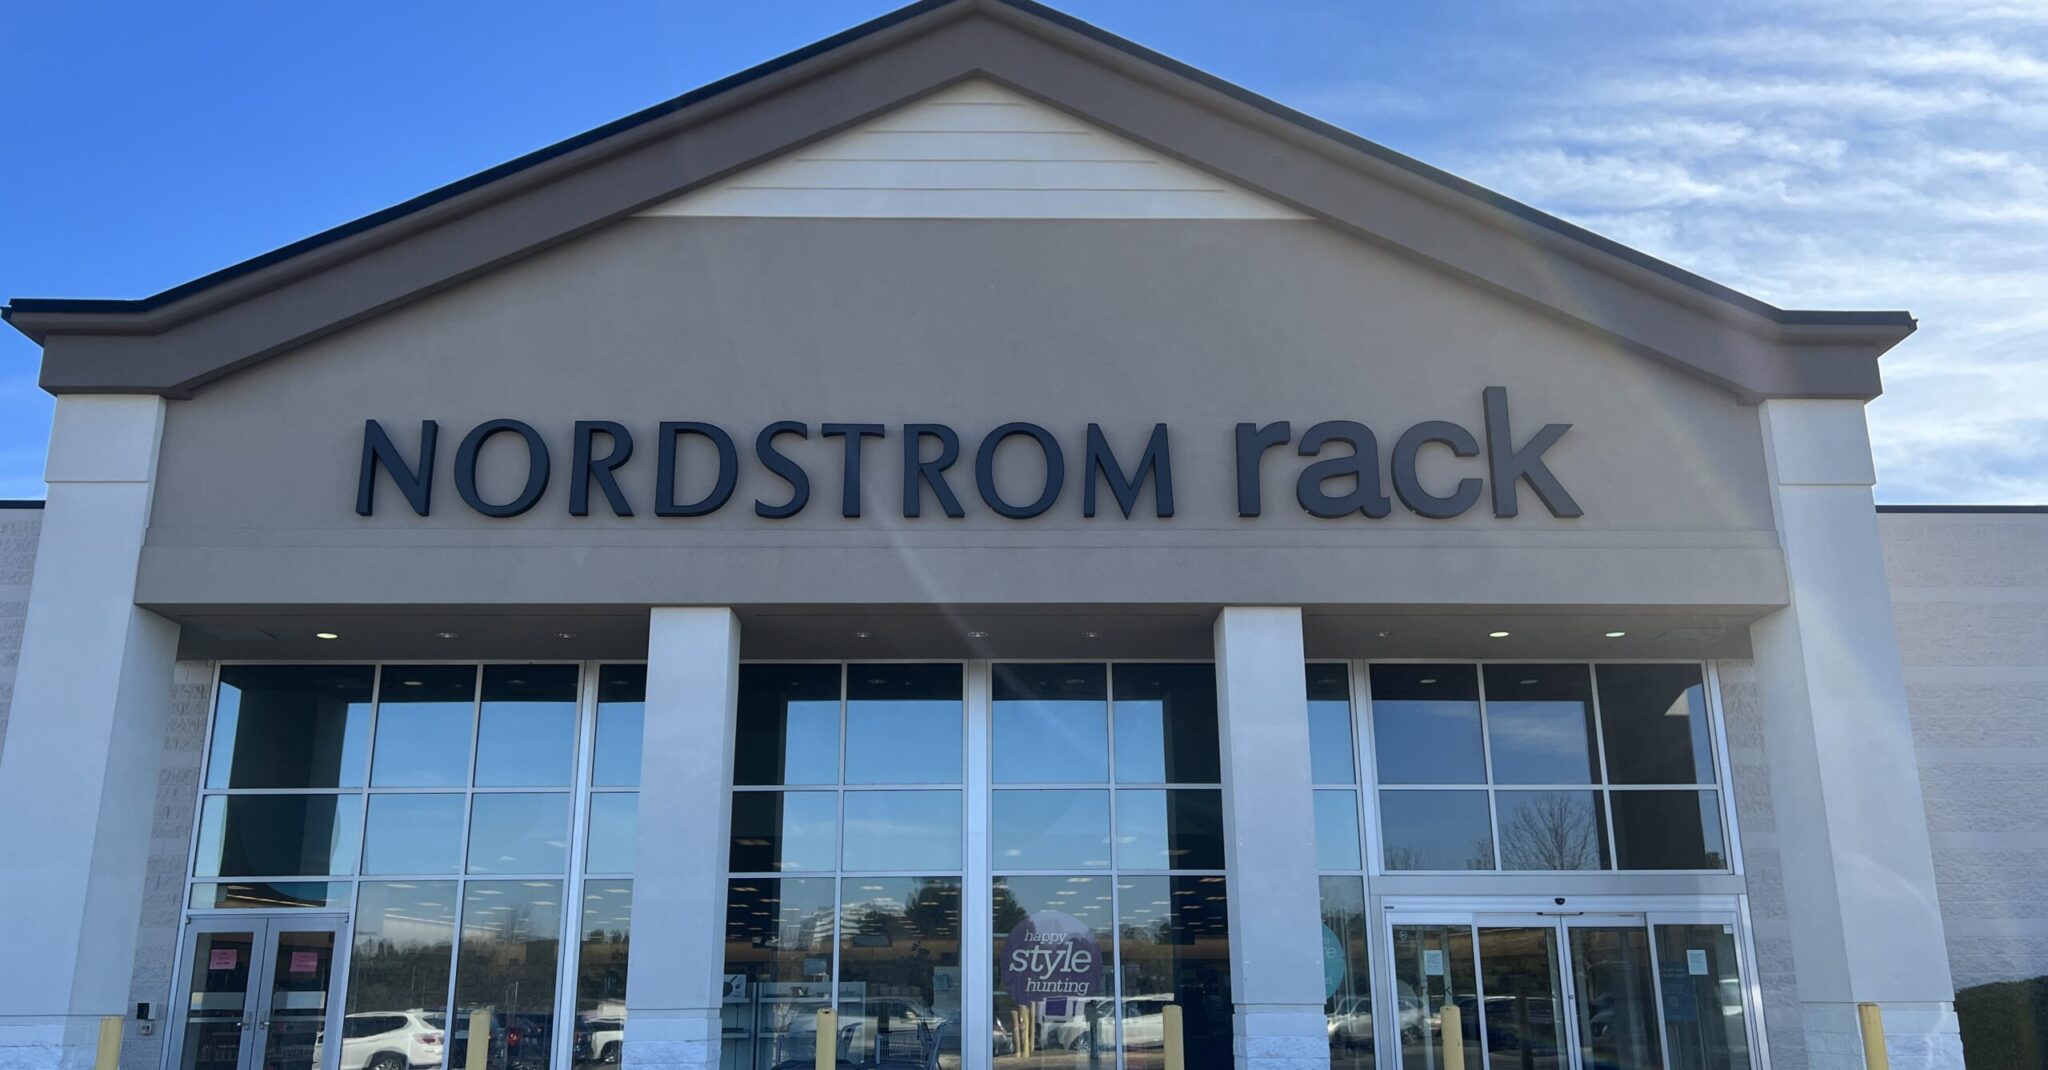 Nordstrom Rack is relocating to The Summit in spring 2023